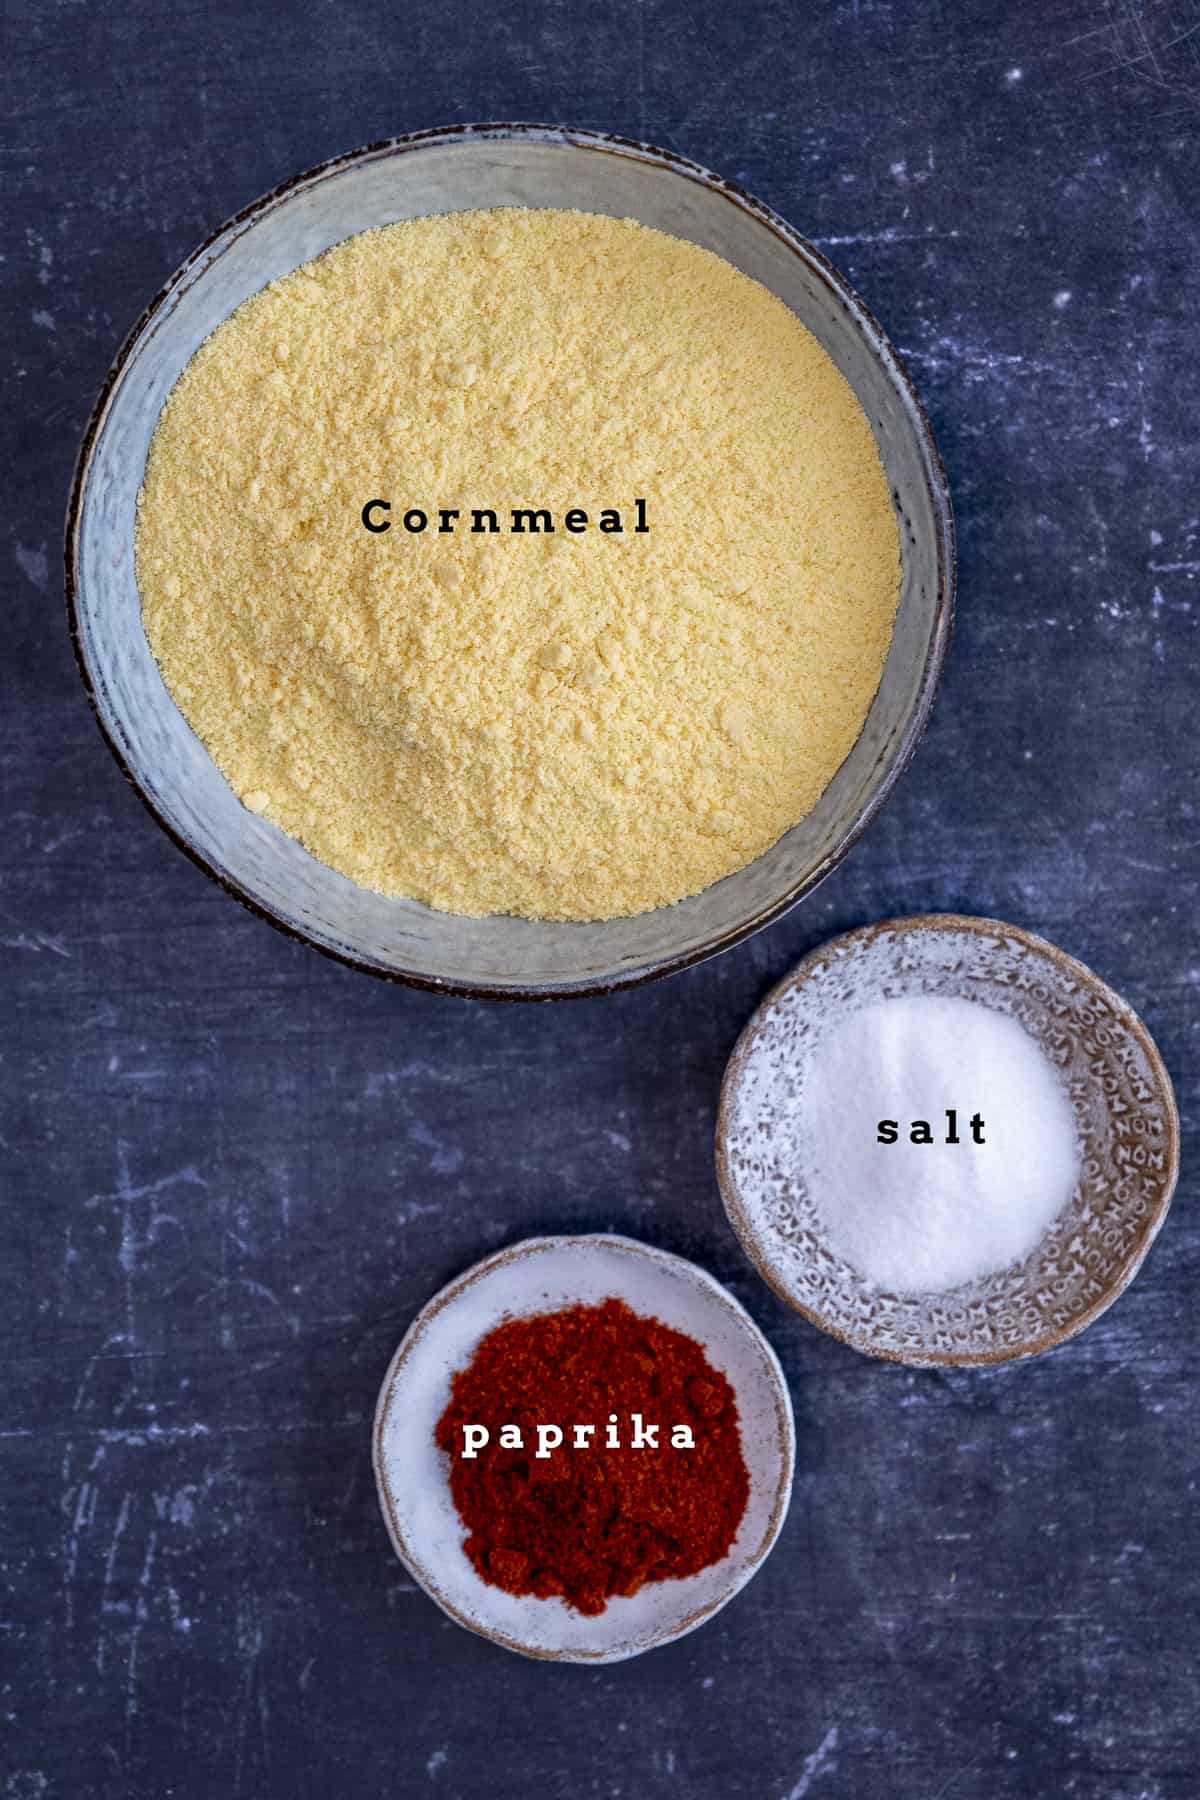 Cornmeal, paprika and salt in small bowls.